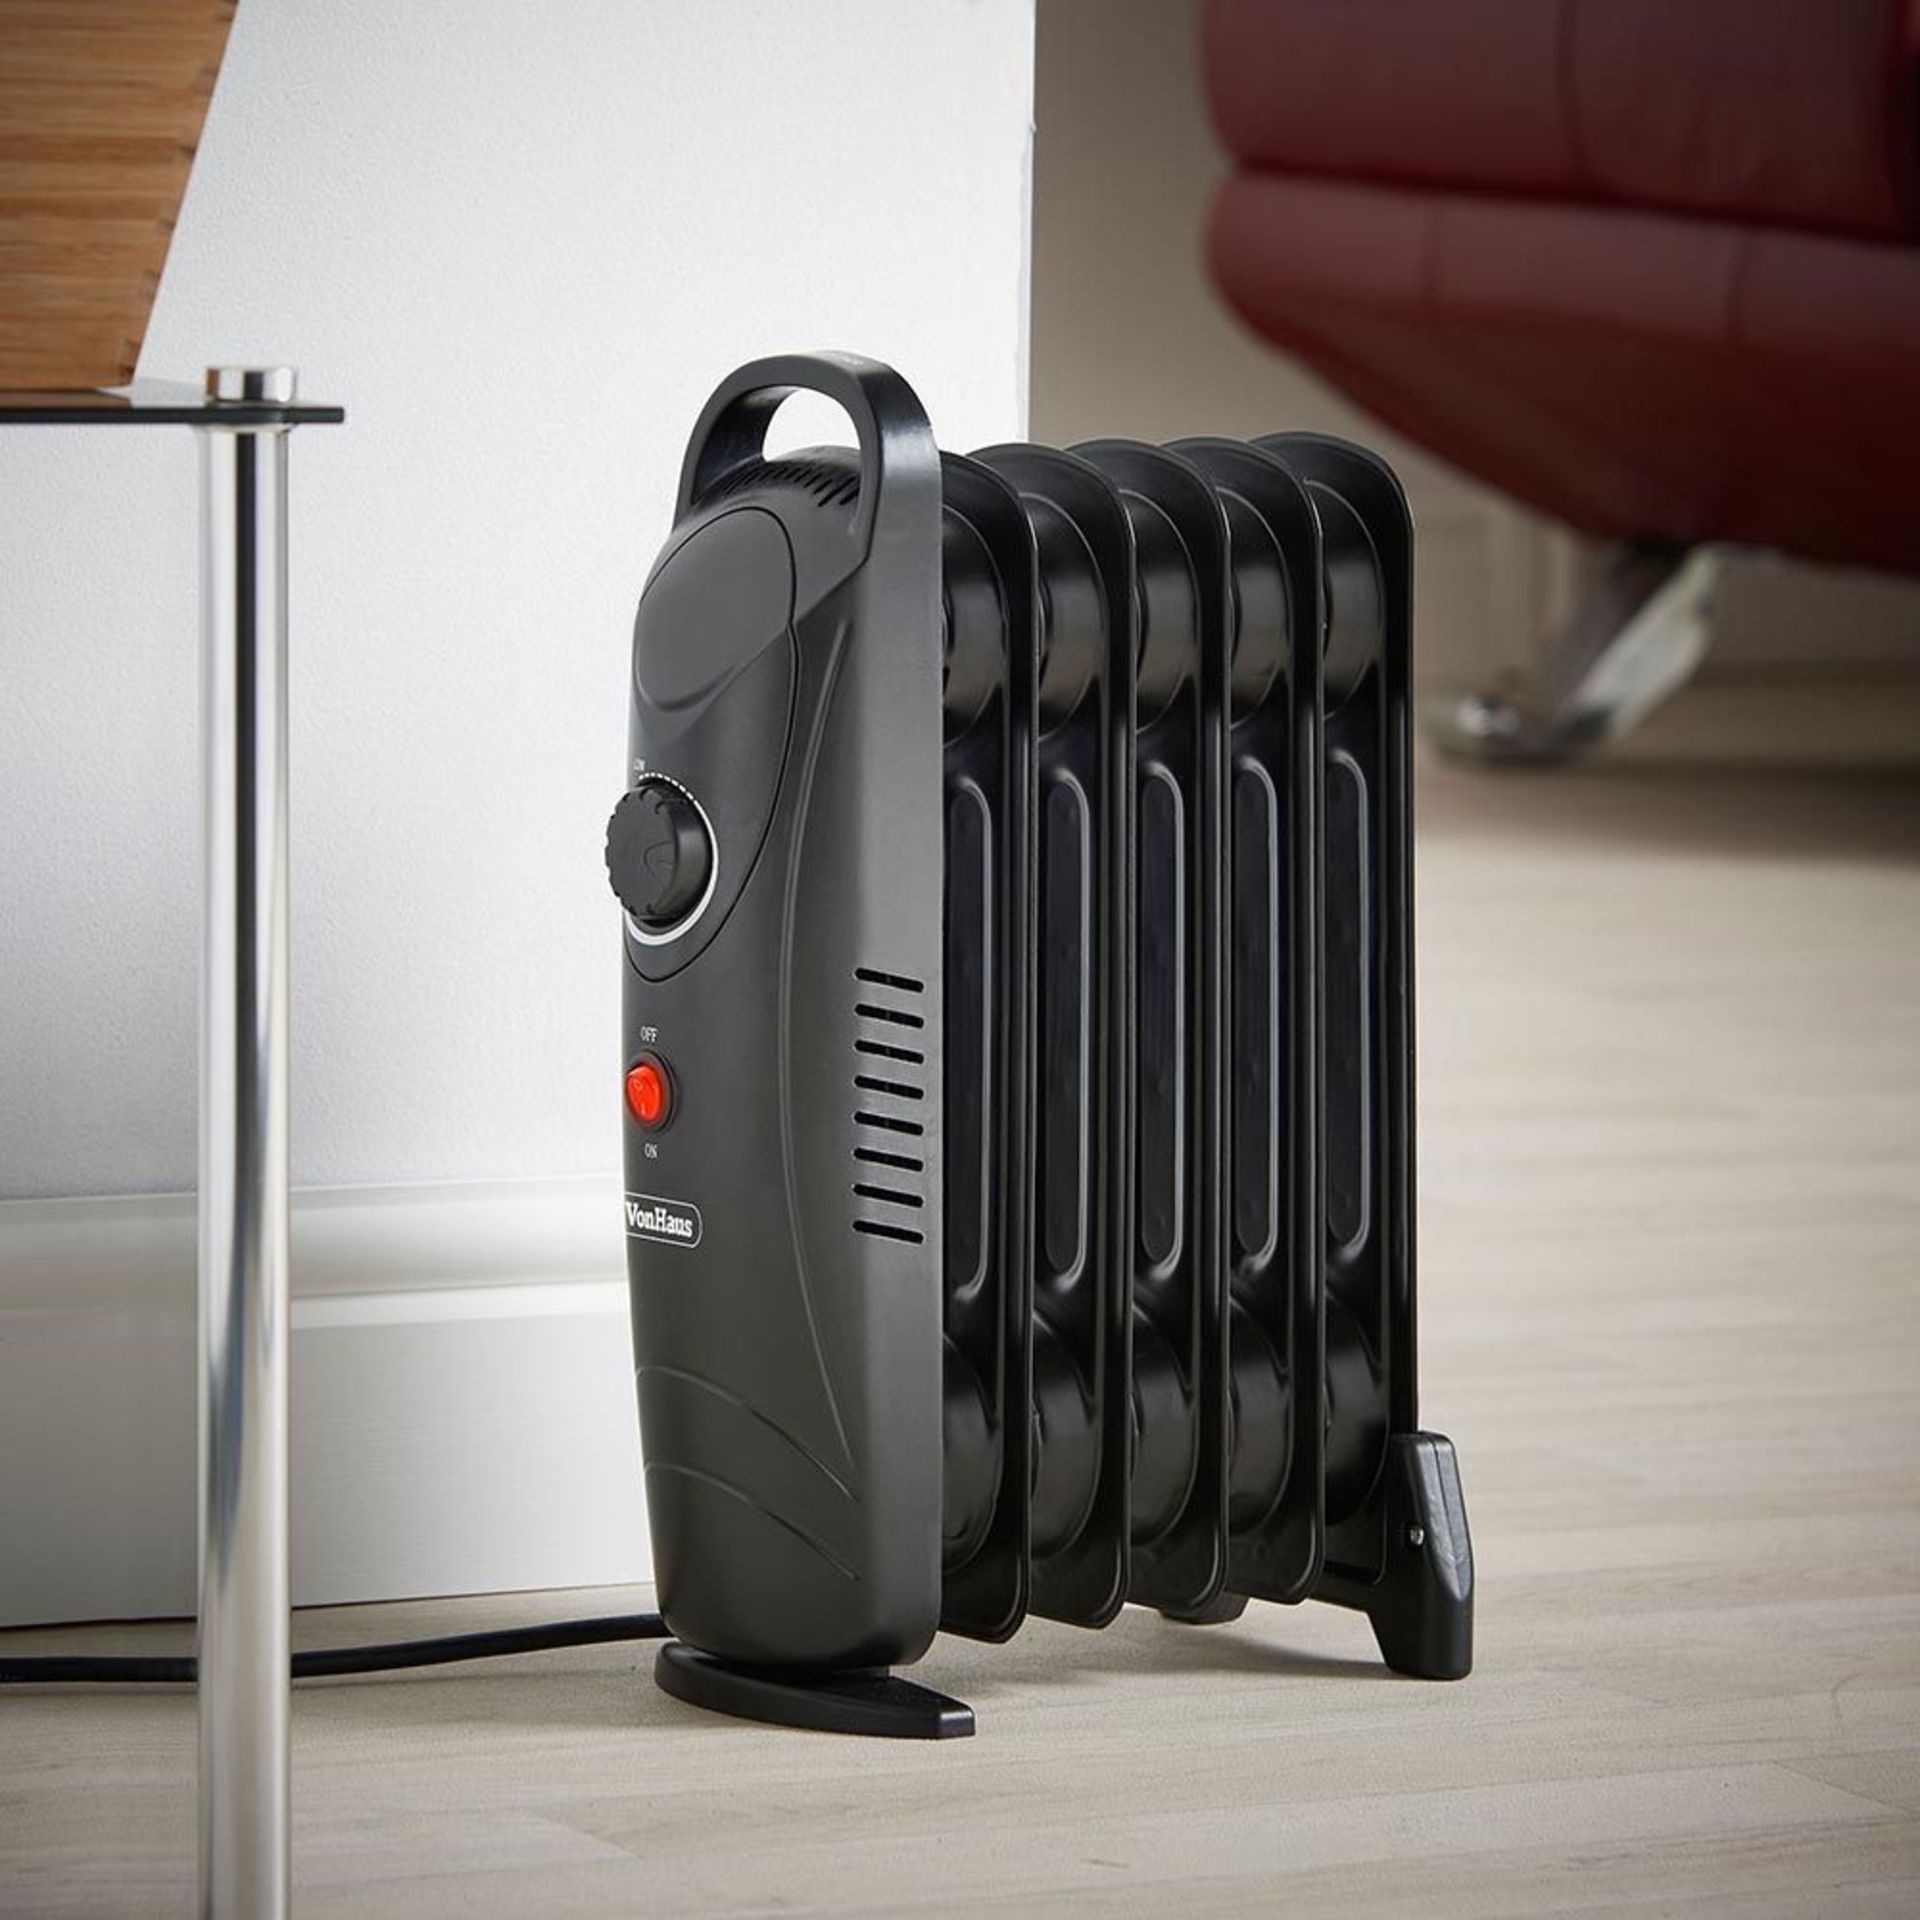 (SU1062) 6 Fin 800W Oil Filled Radiator - Black Compact yet powerful 800W radiator with 6 oil-...